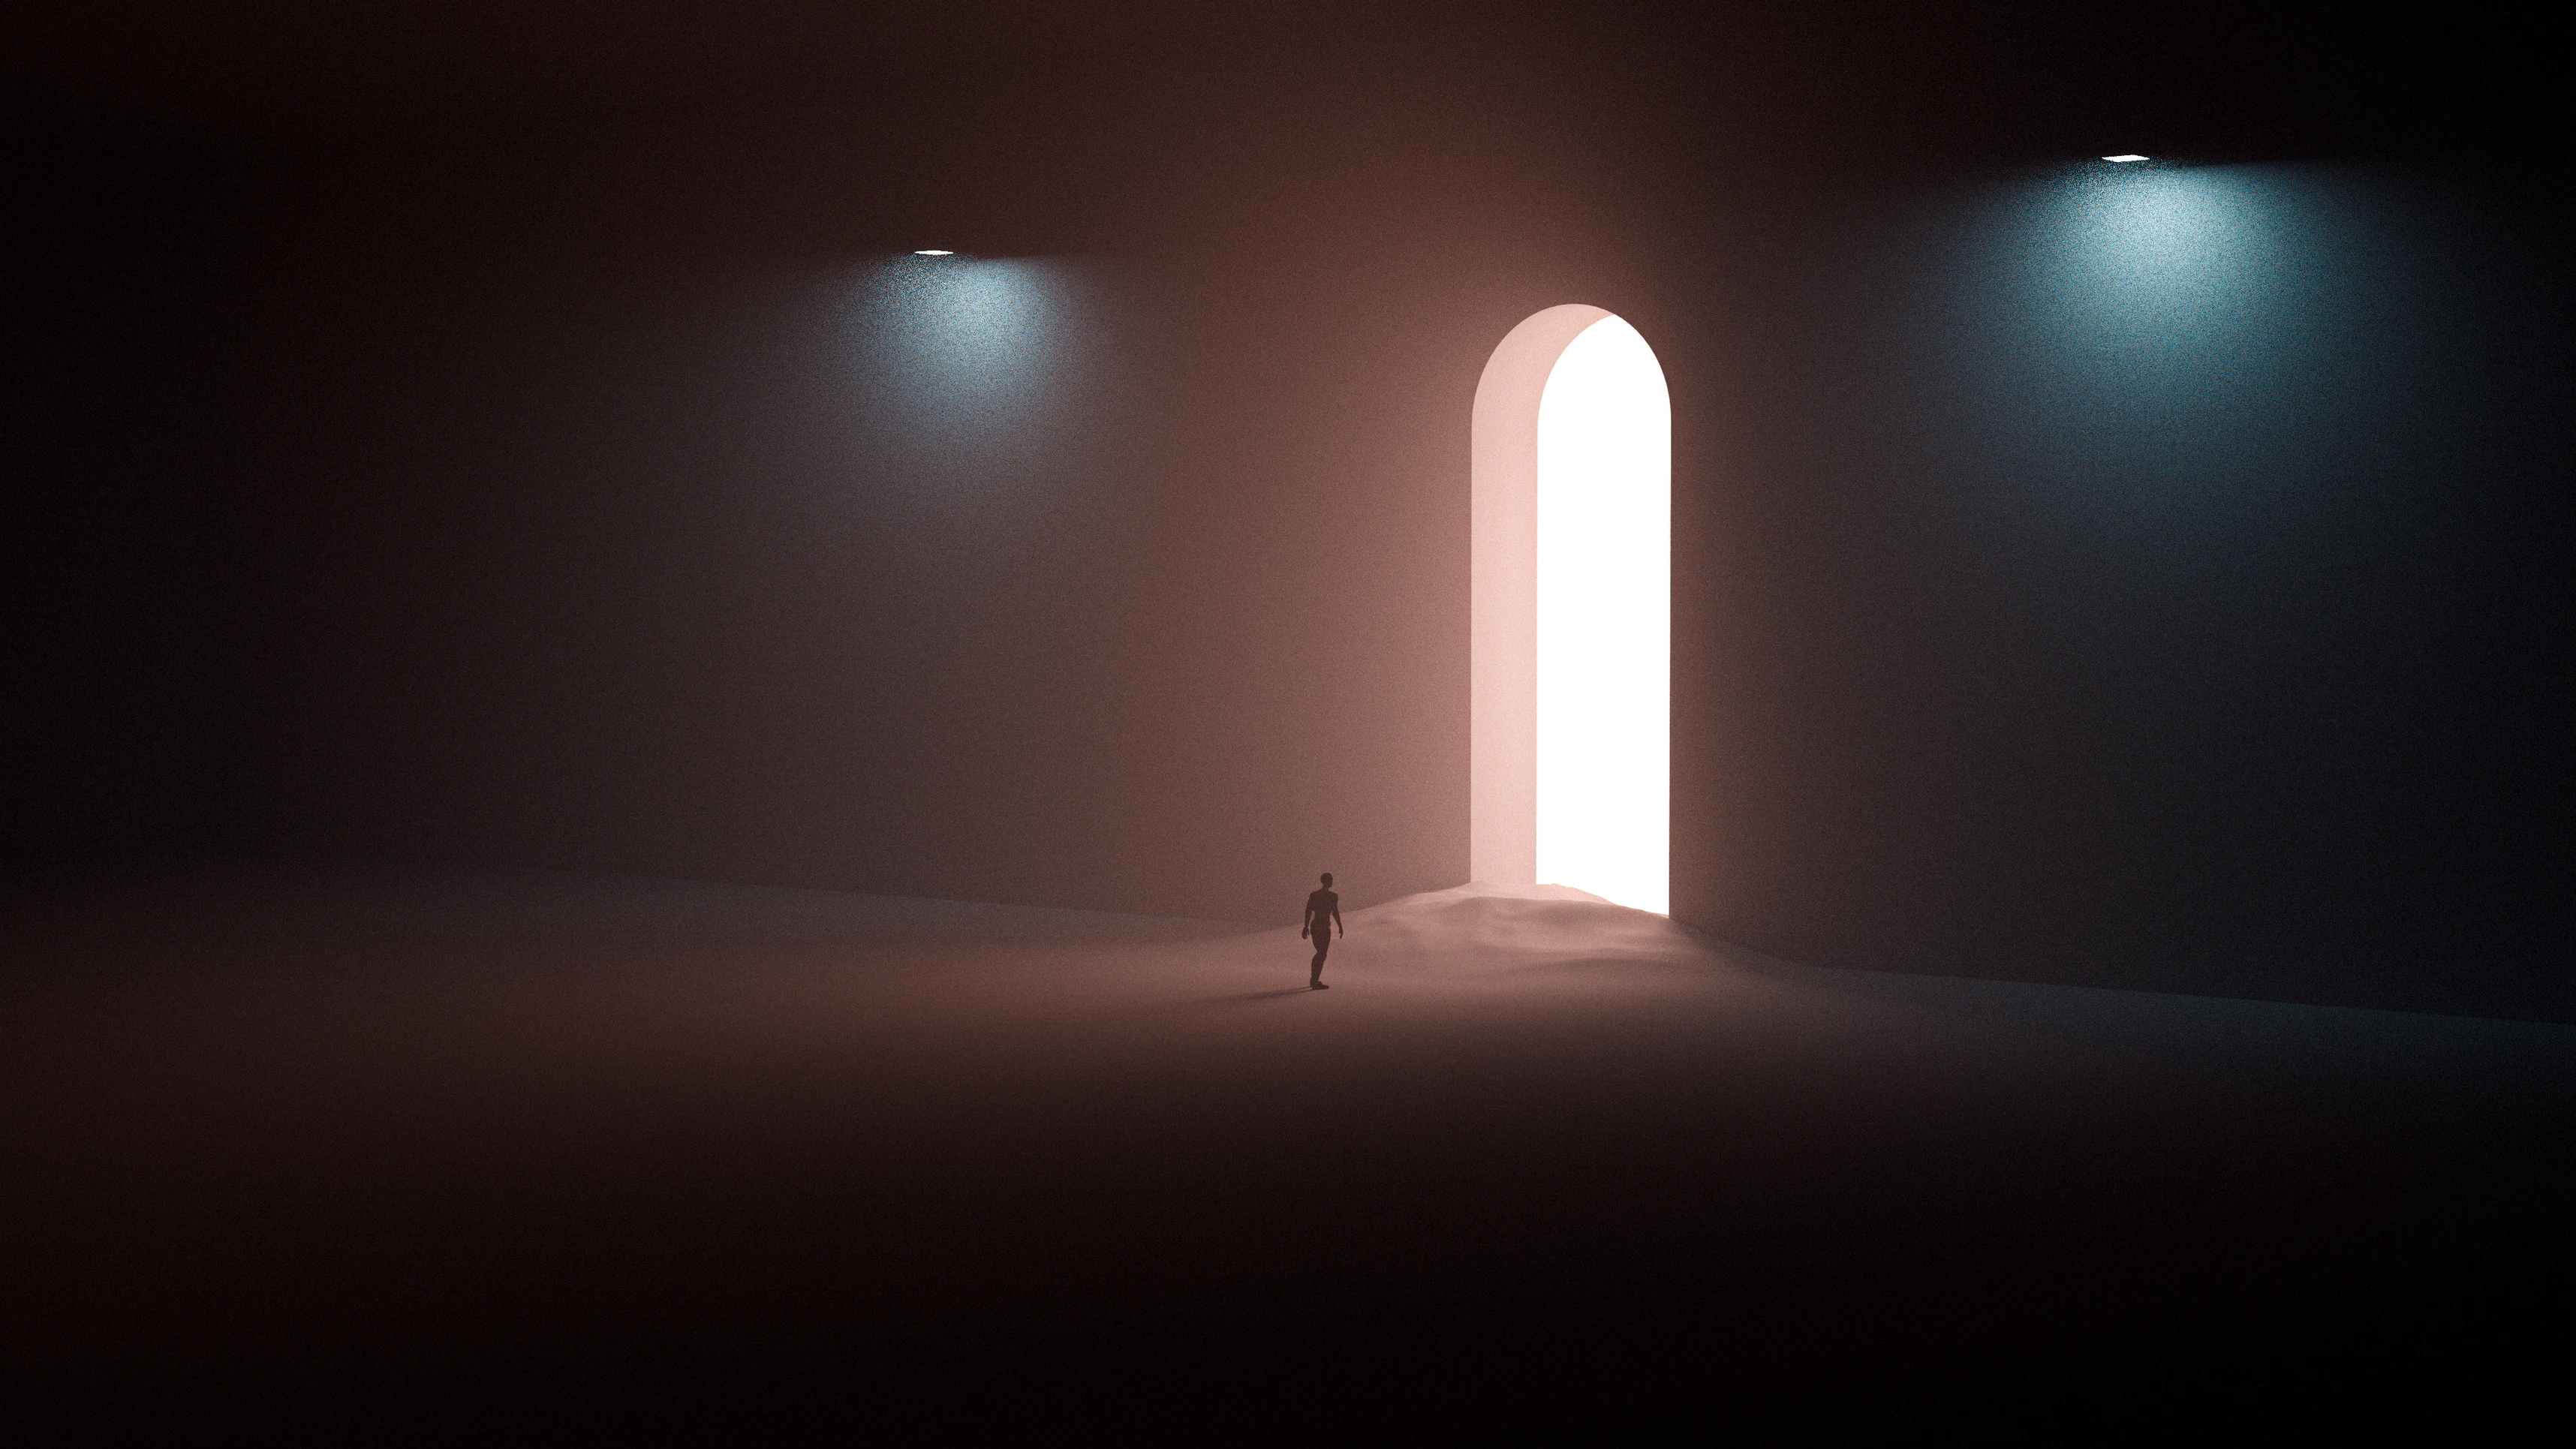 A man in a dark room is about to walk through a large portal in the wall.